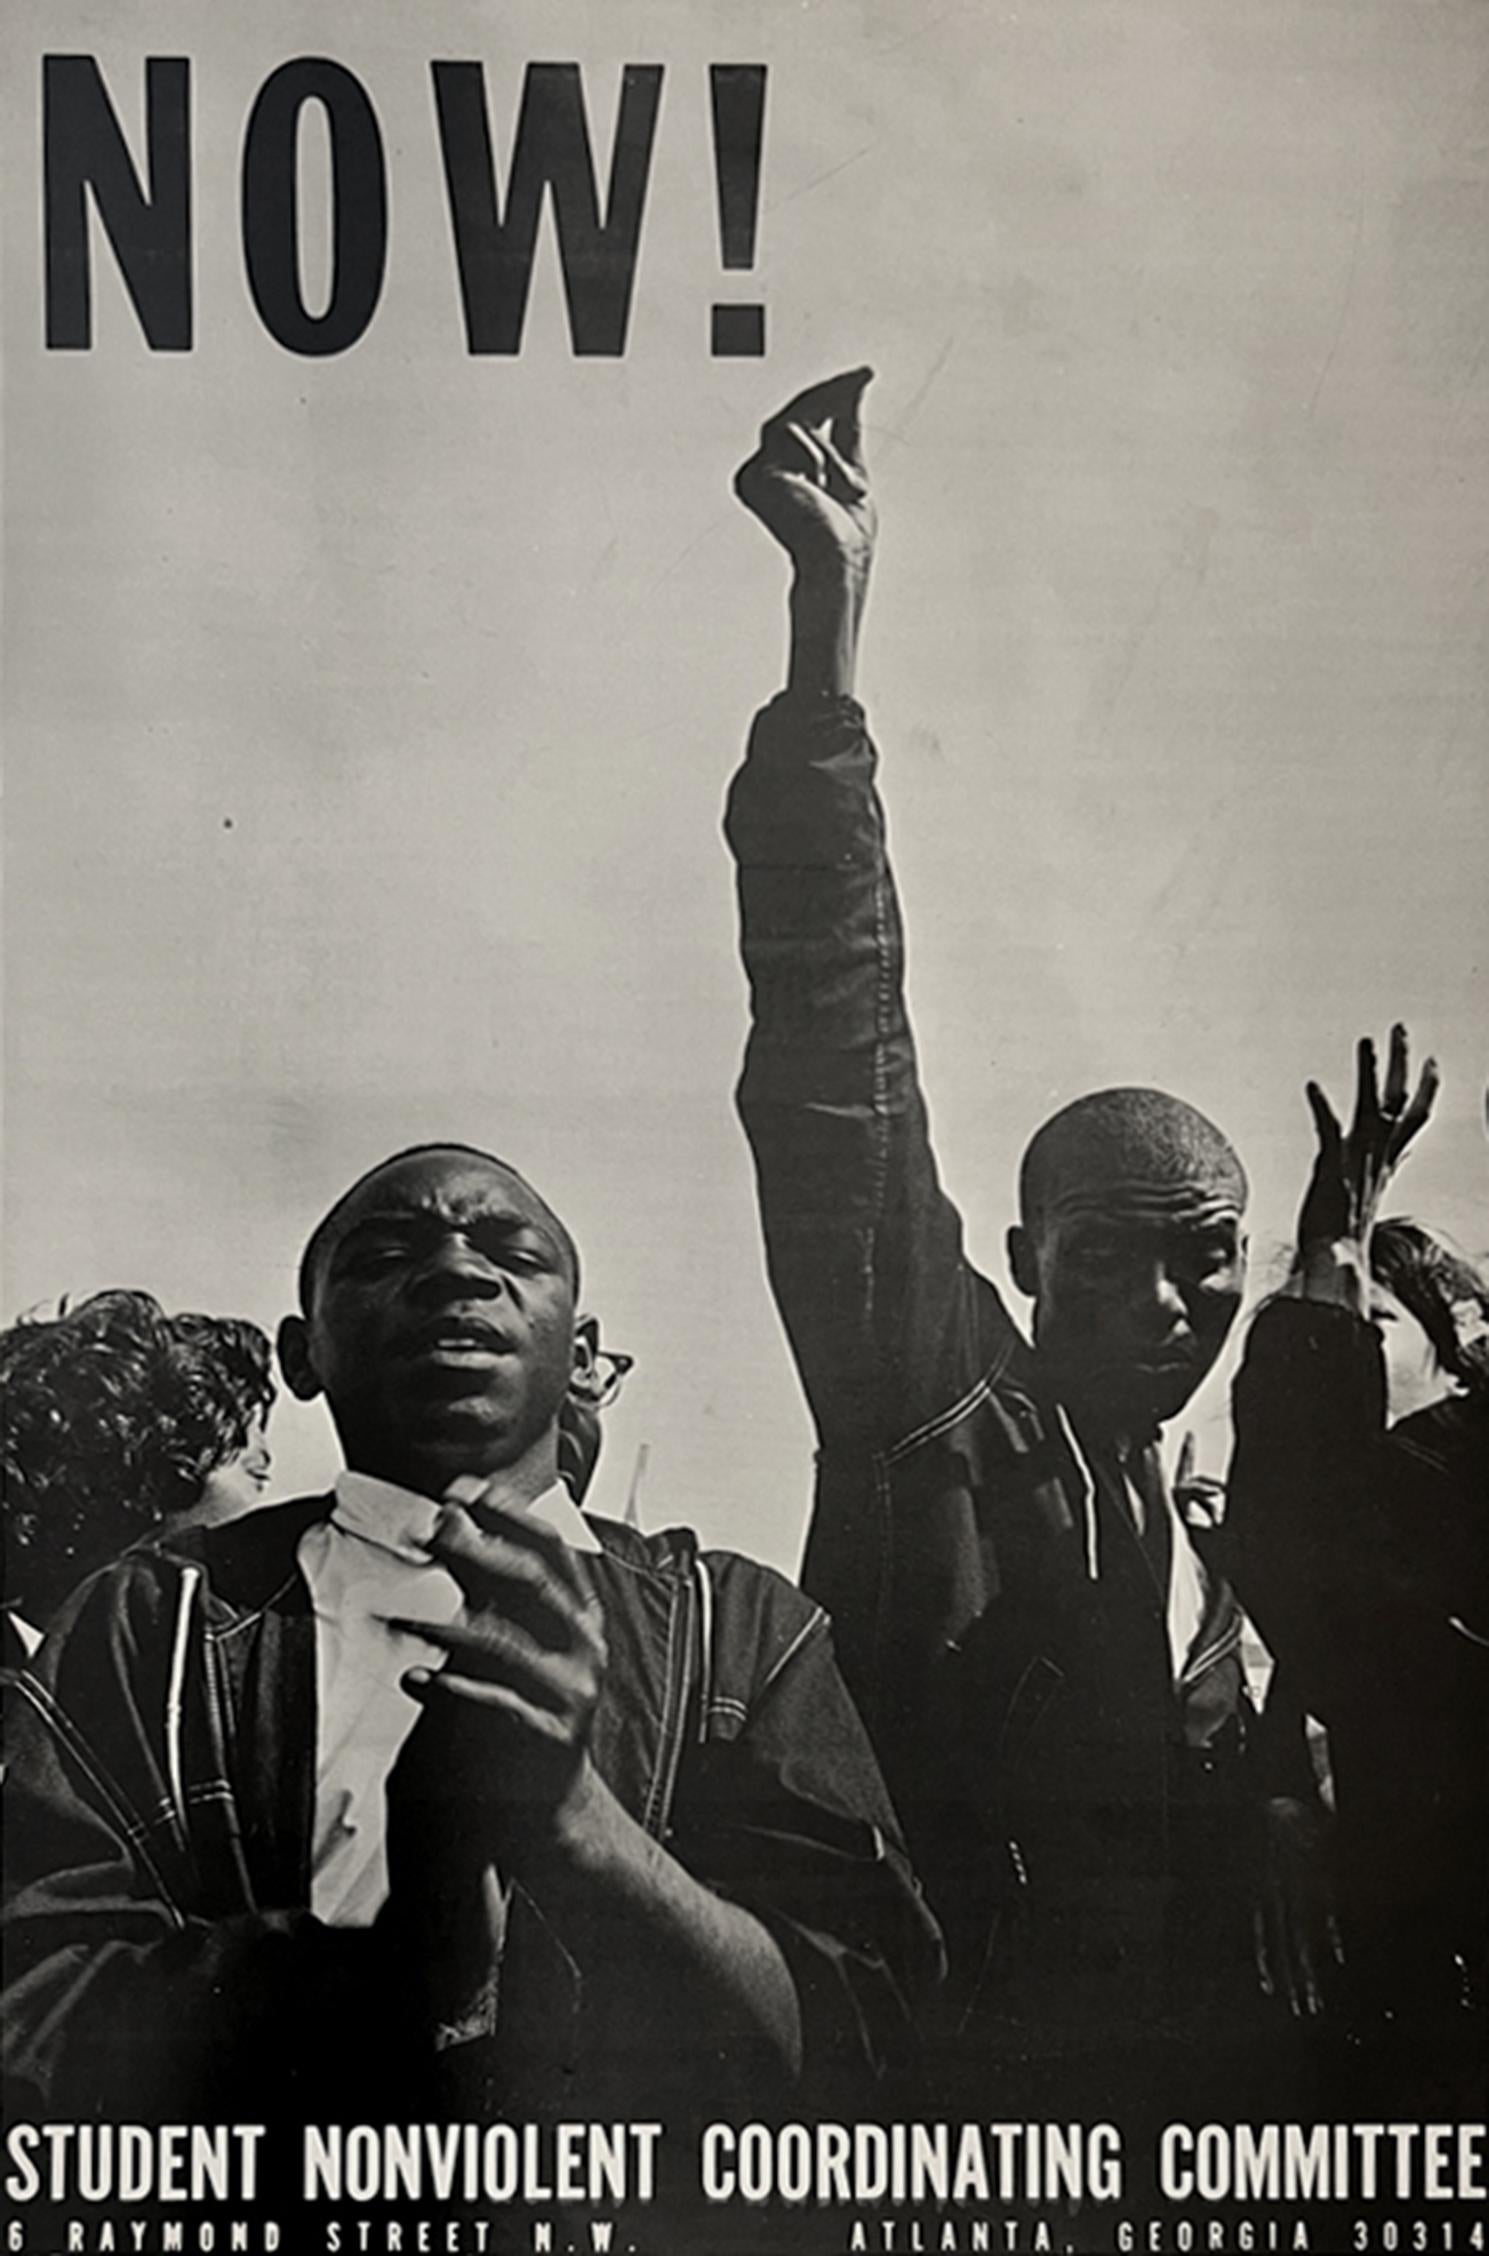 Danny Lyon Black and White Photograph - The March on Washington, August 28, 1963, SNCC poster